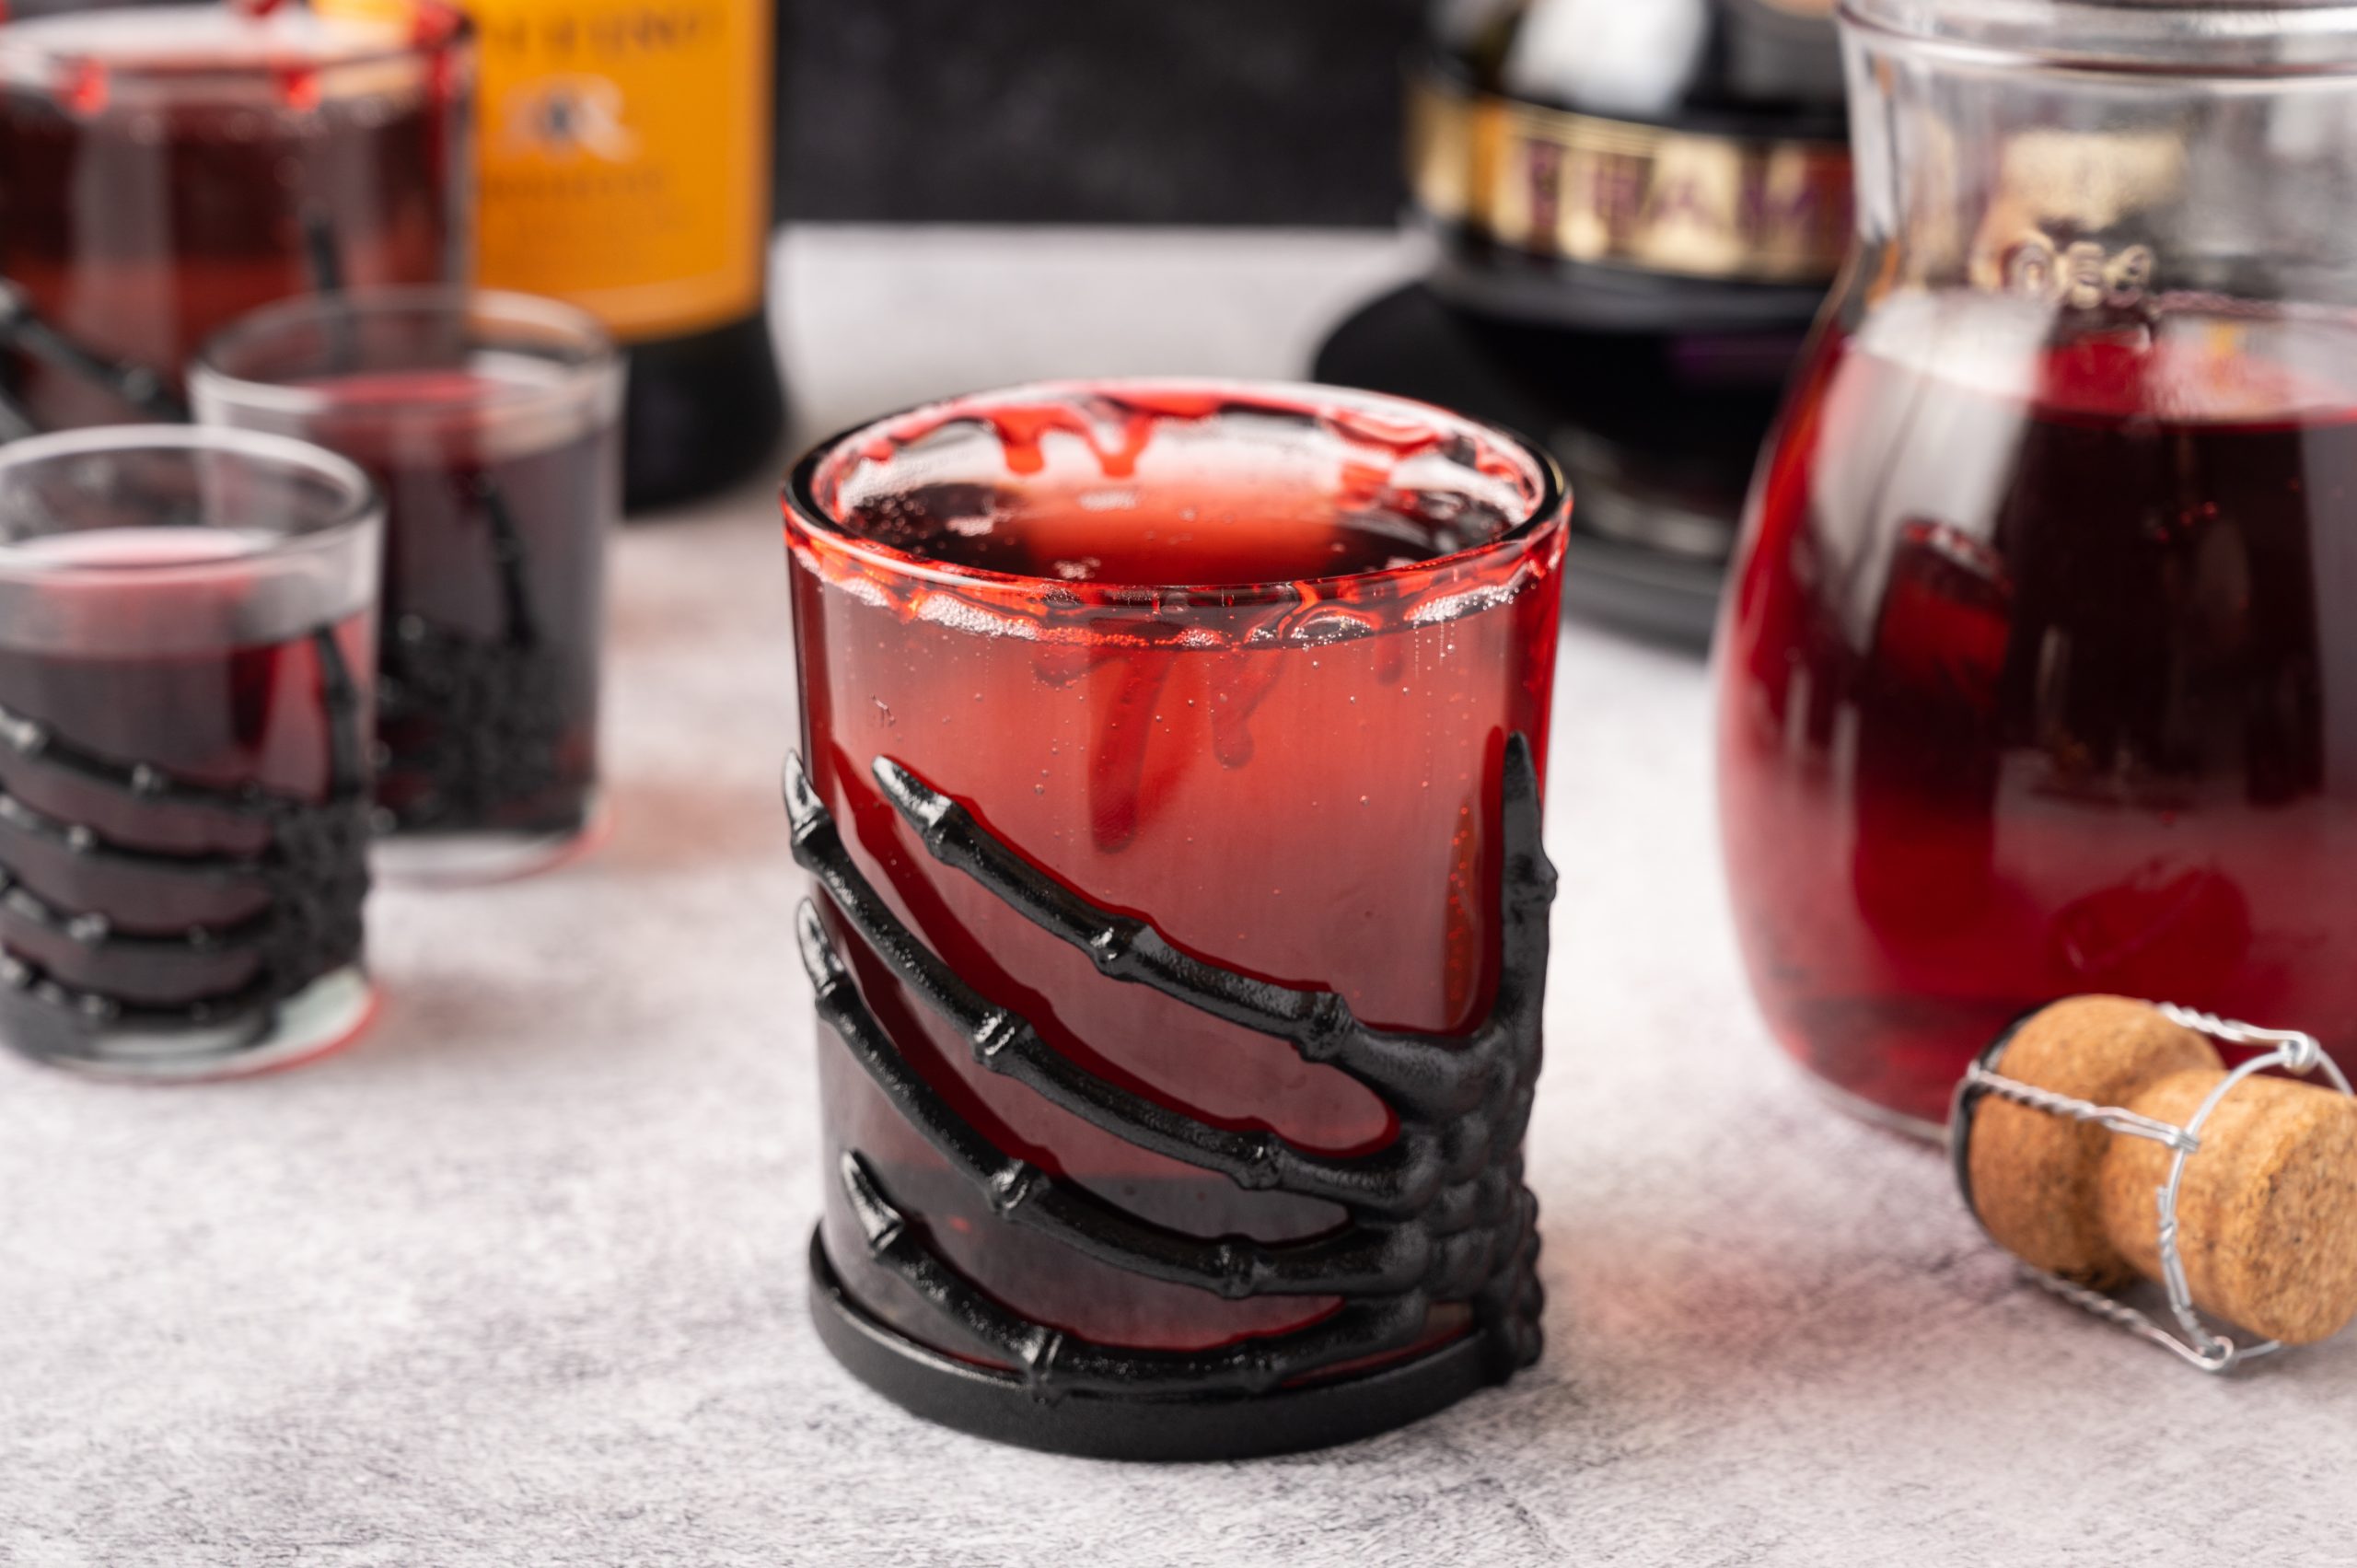 Vampire's Kiss Cocktail served in a glass with a black skeleton hand wrapped around it and the ingredients behind it